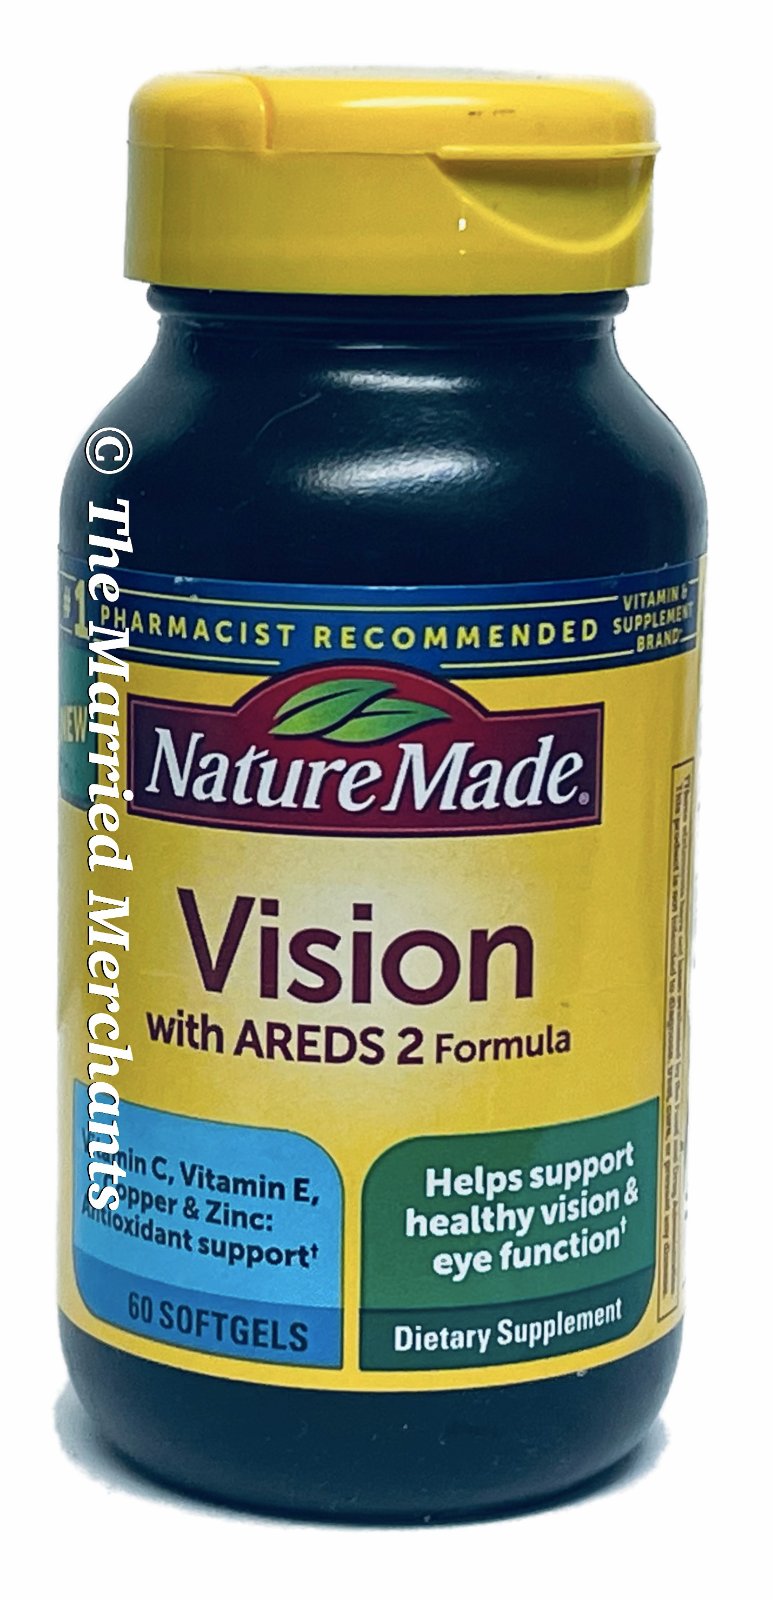 Nature Made Vision with AREDS 2 Formula 60 softgels 1/2025 FRESH!! - $14.97